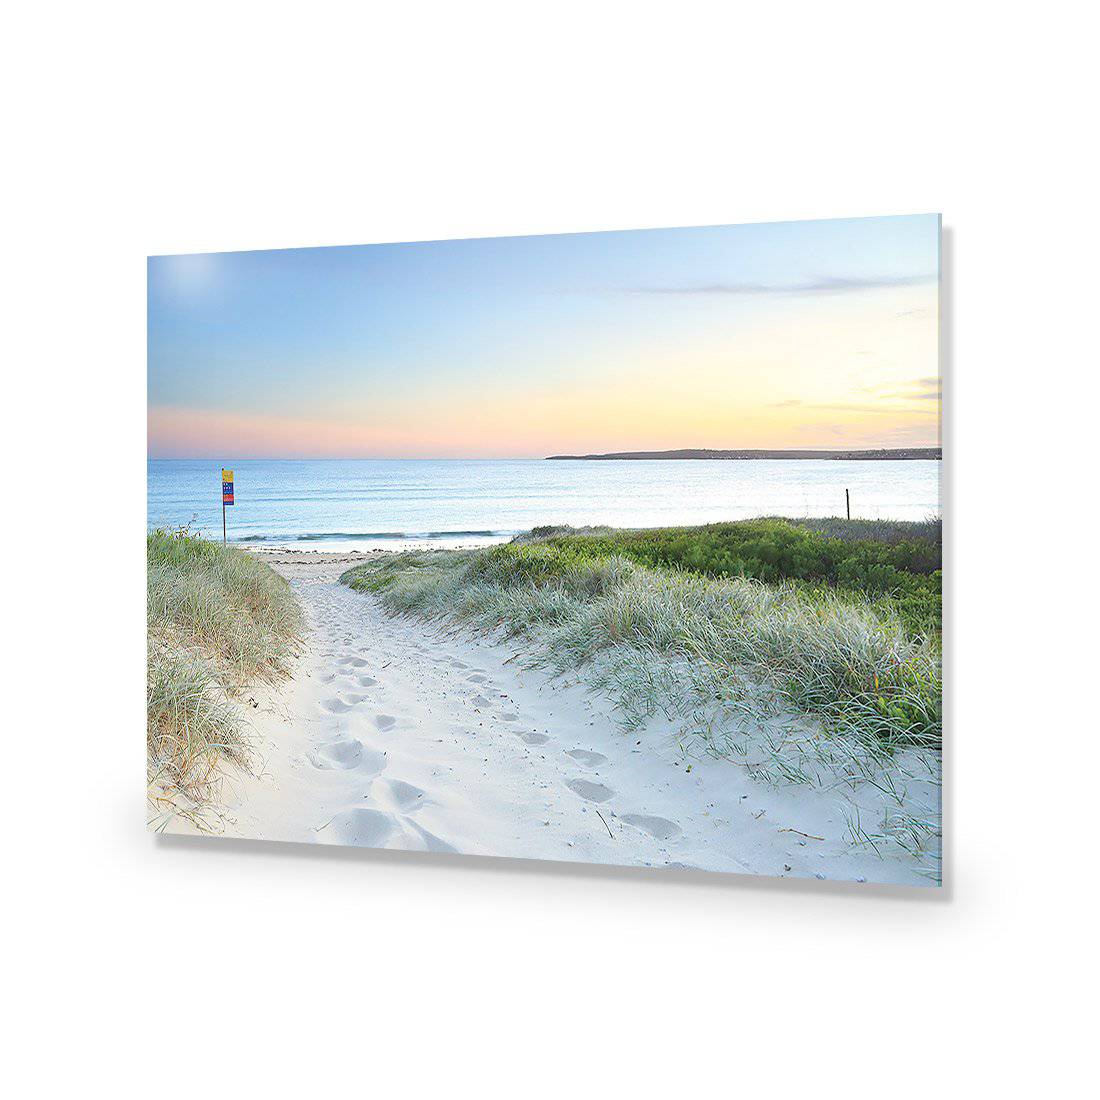 Sand Steps-Acrylic-Wall Art Design-Without Border-Acrylic - No Frame-45x30cm-Wall Art Designs